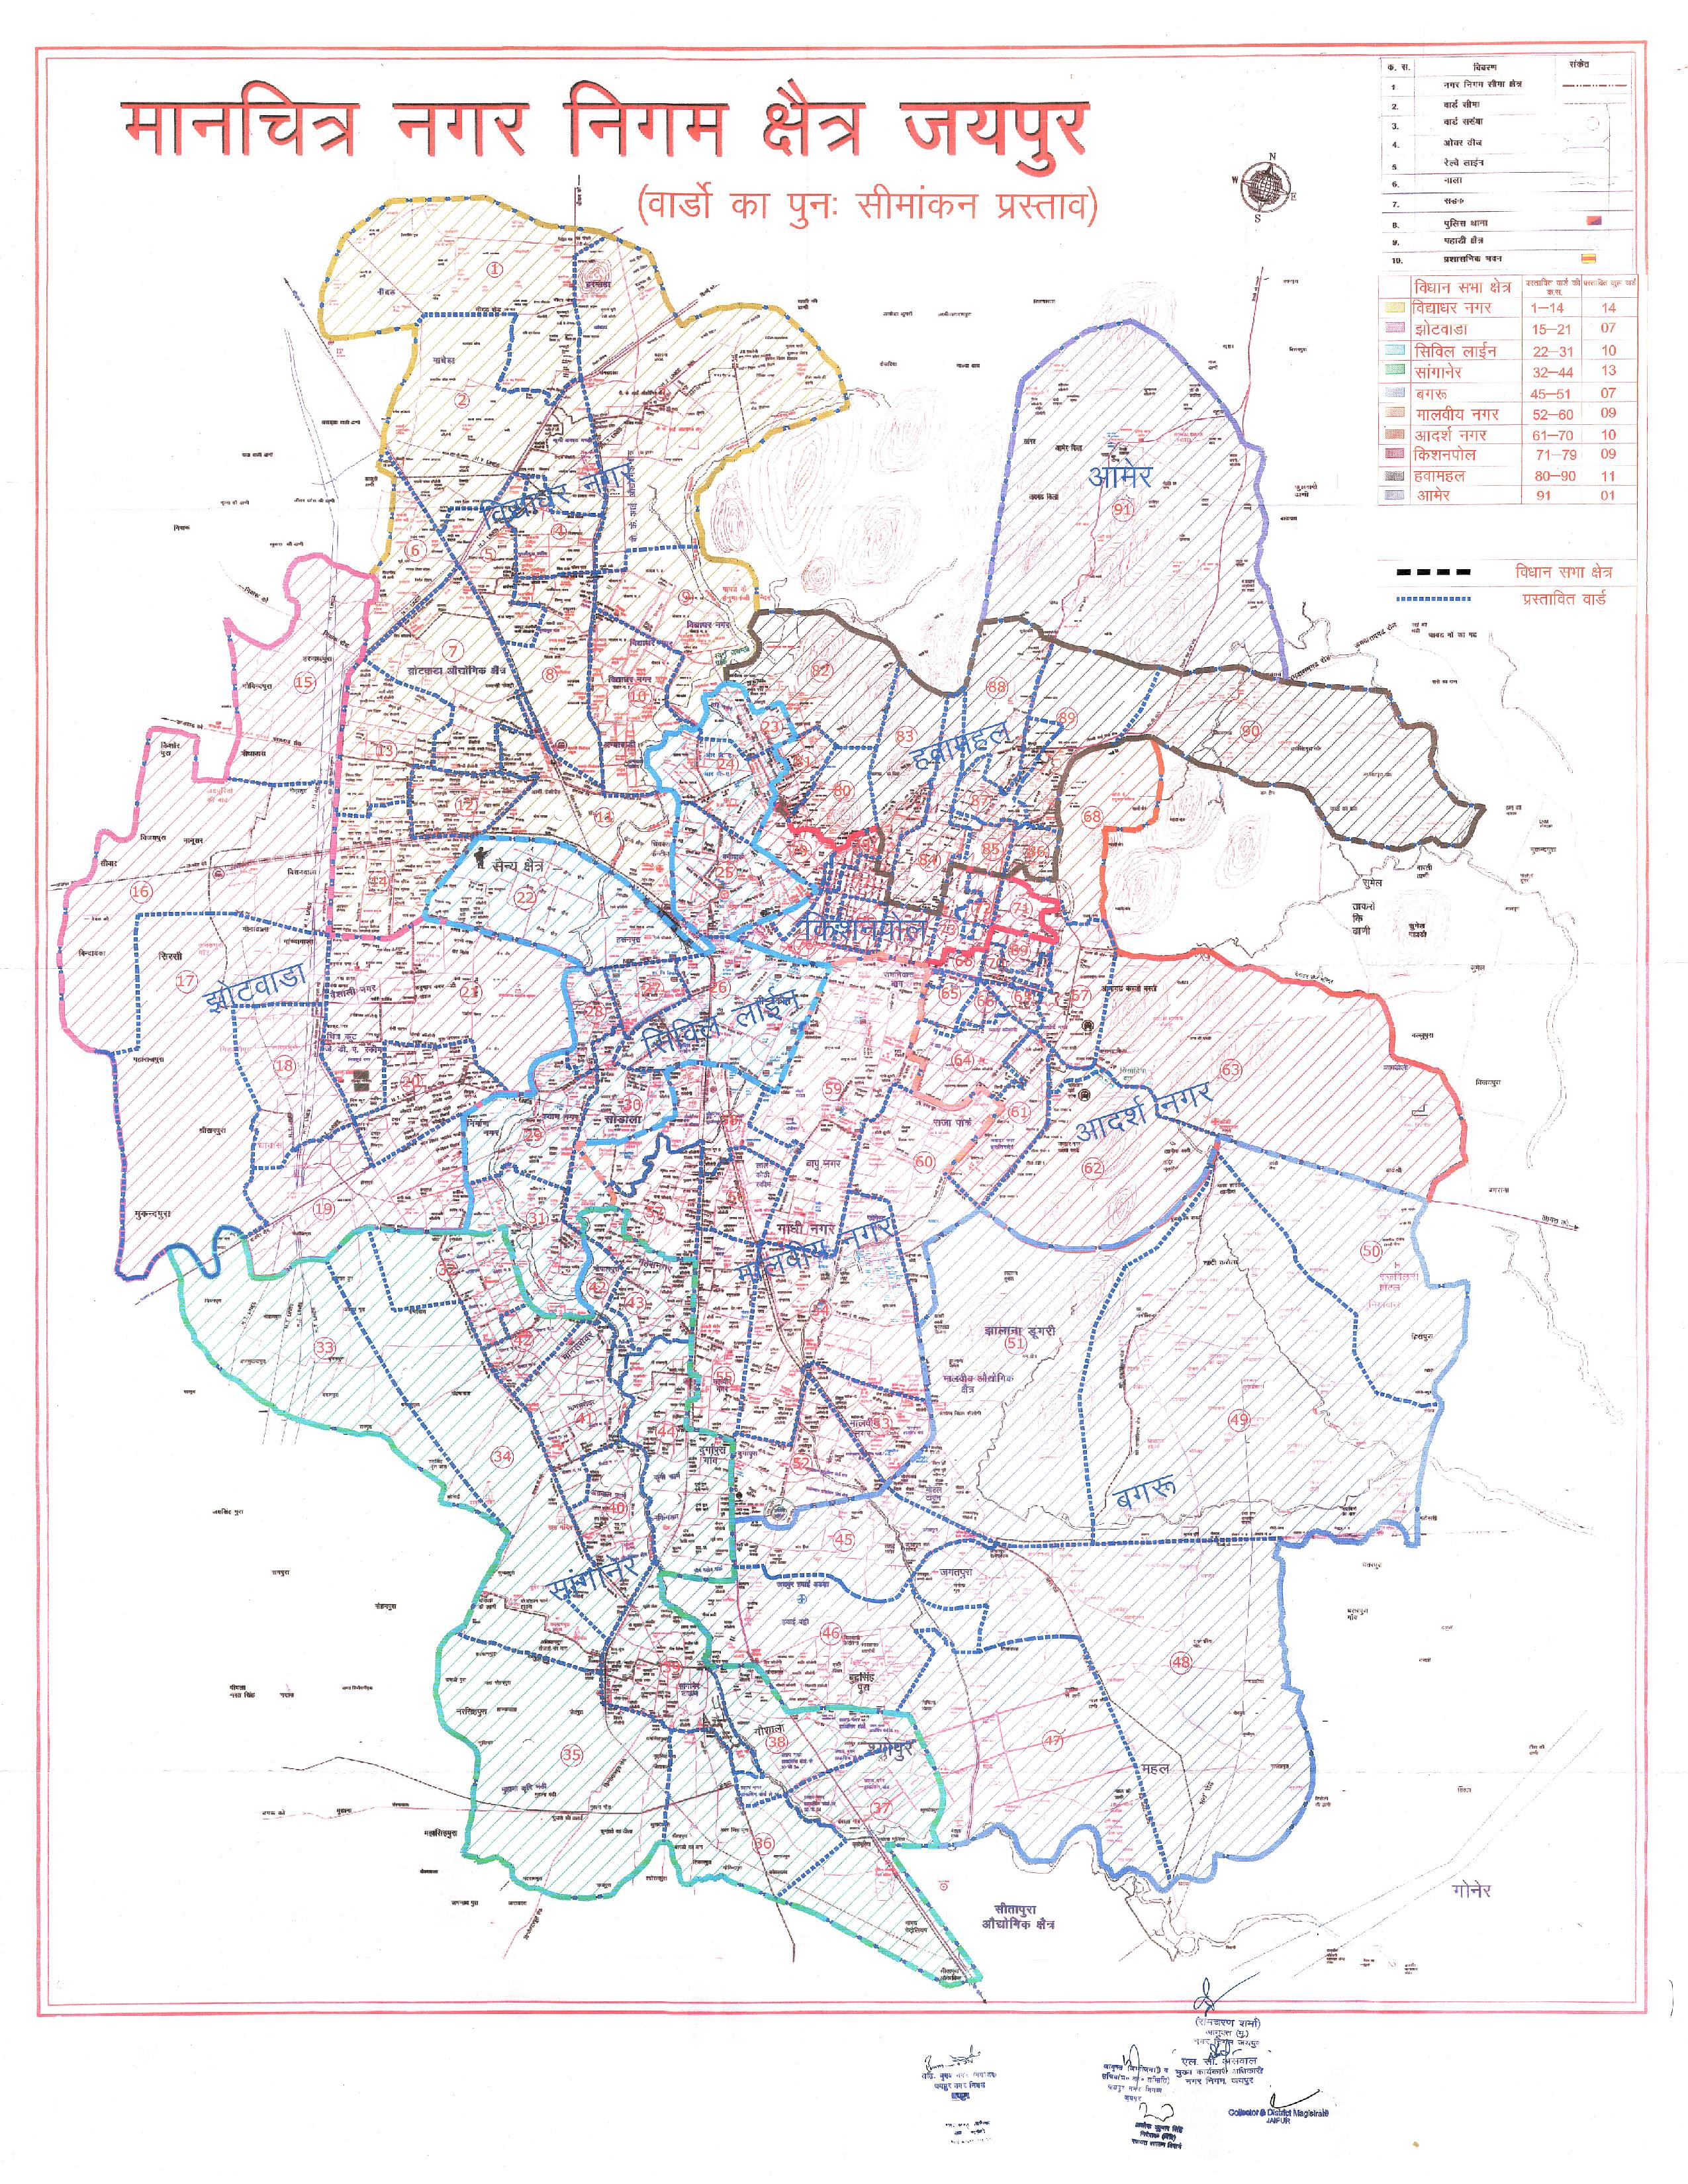 Jaipur Route Map Image